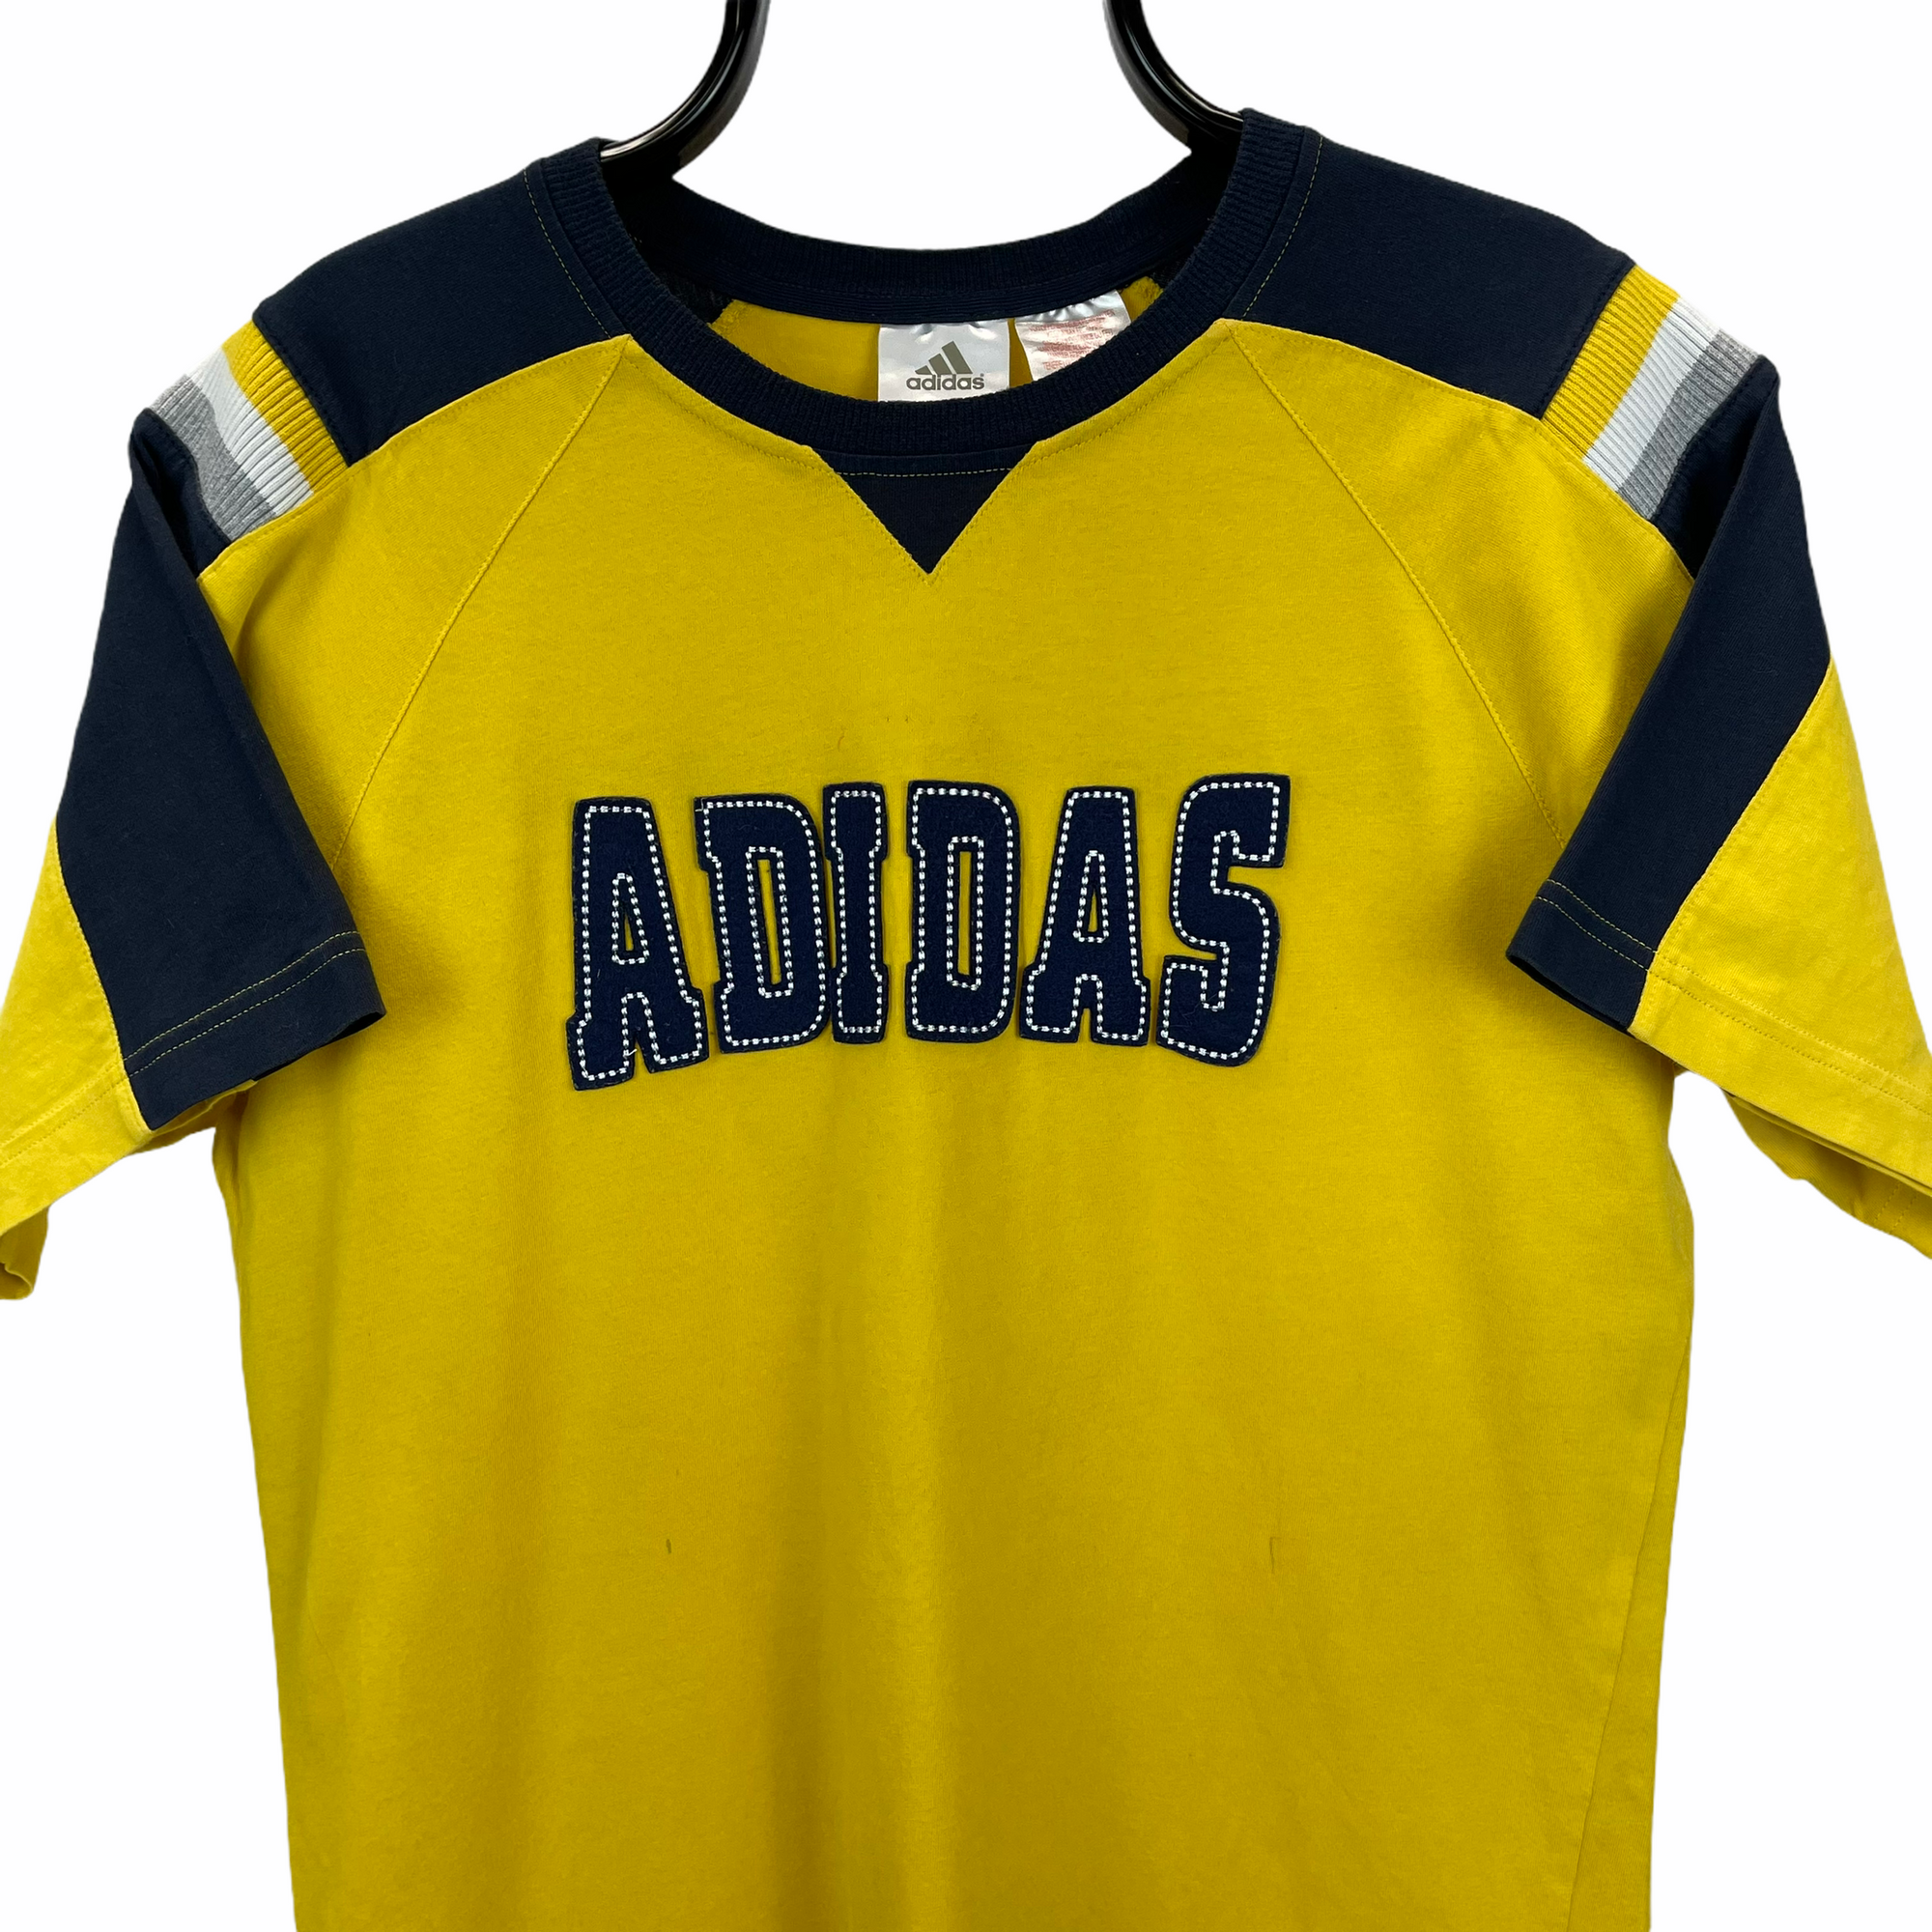 VINTAGE ADIDAS SPELLOUT TEE IN YELLOW & NAVY - MEN'S LARGE/WOMEN'S XL